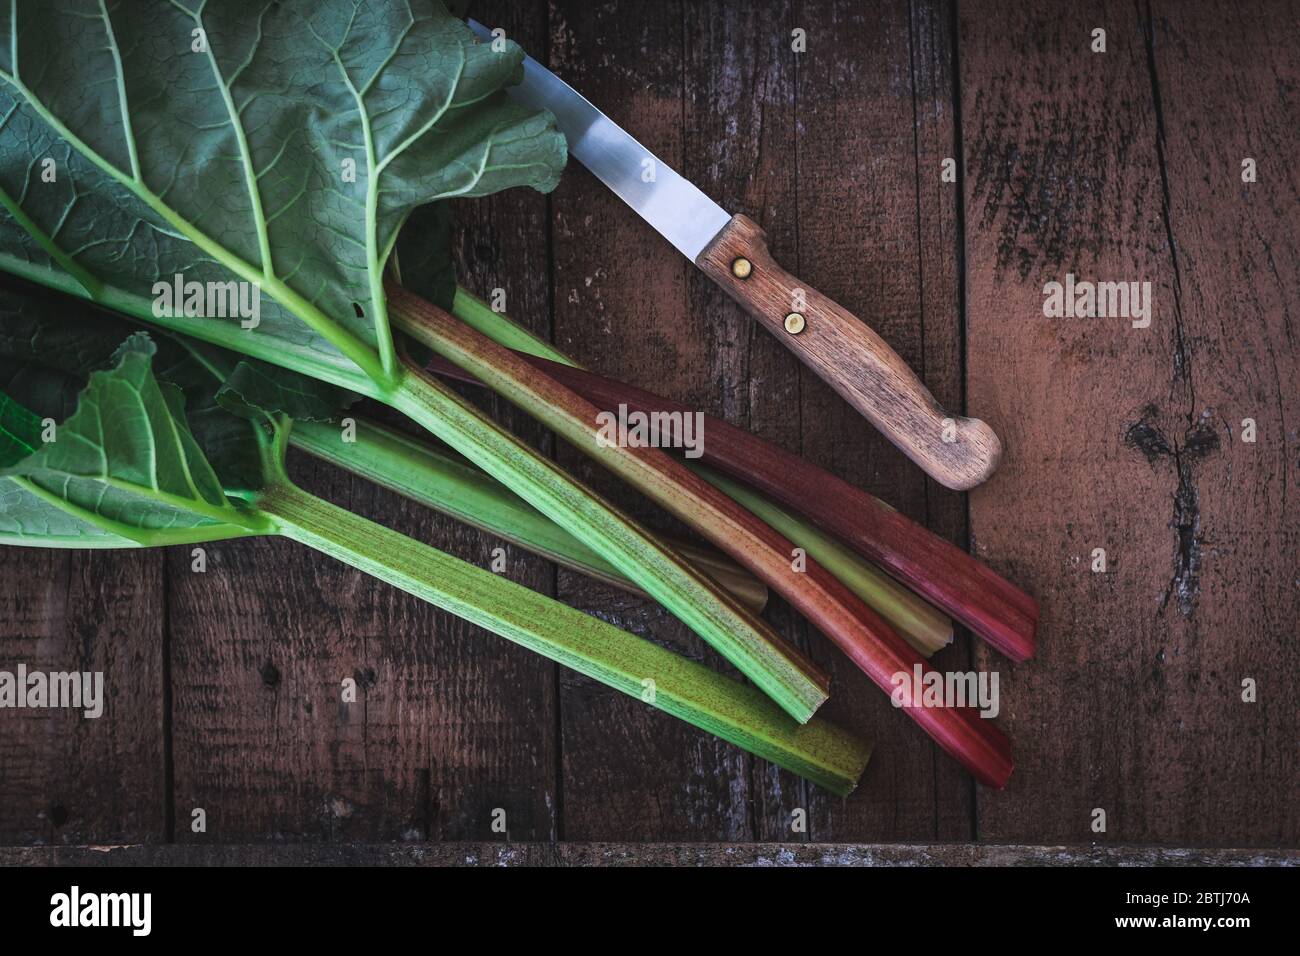 Freshly cut rhubarb stems and a knife on a wooden garden table Stock Photo